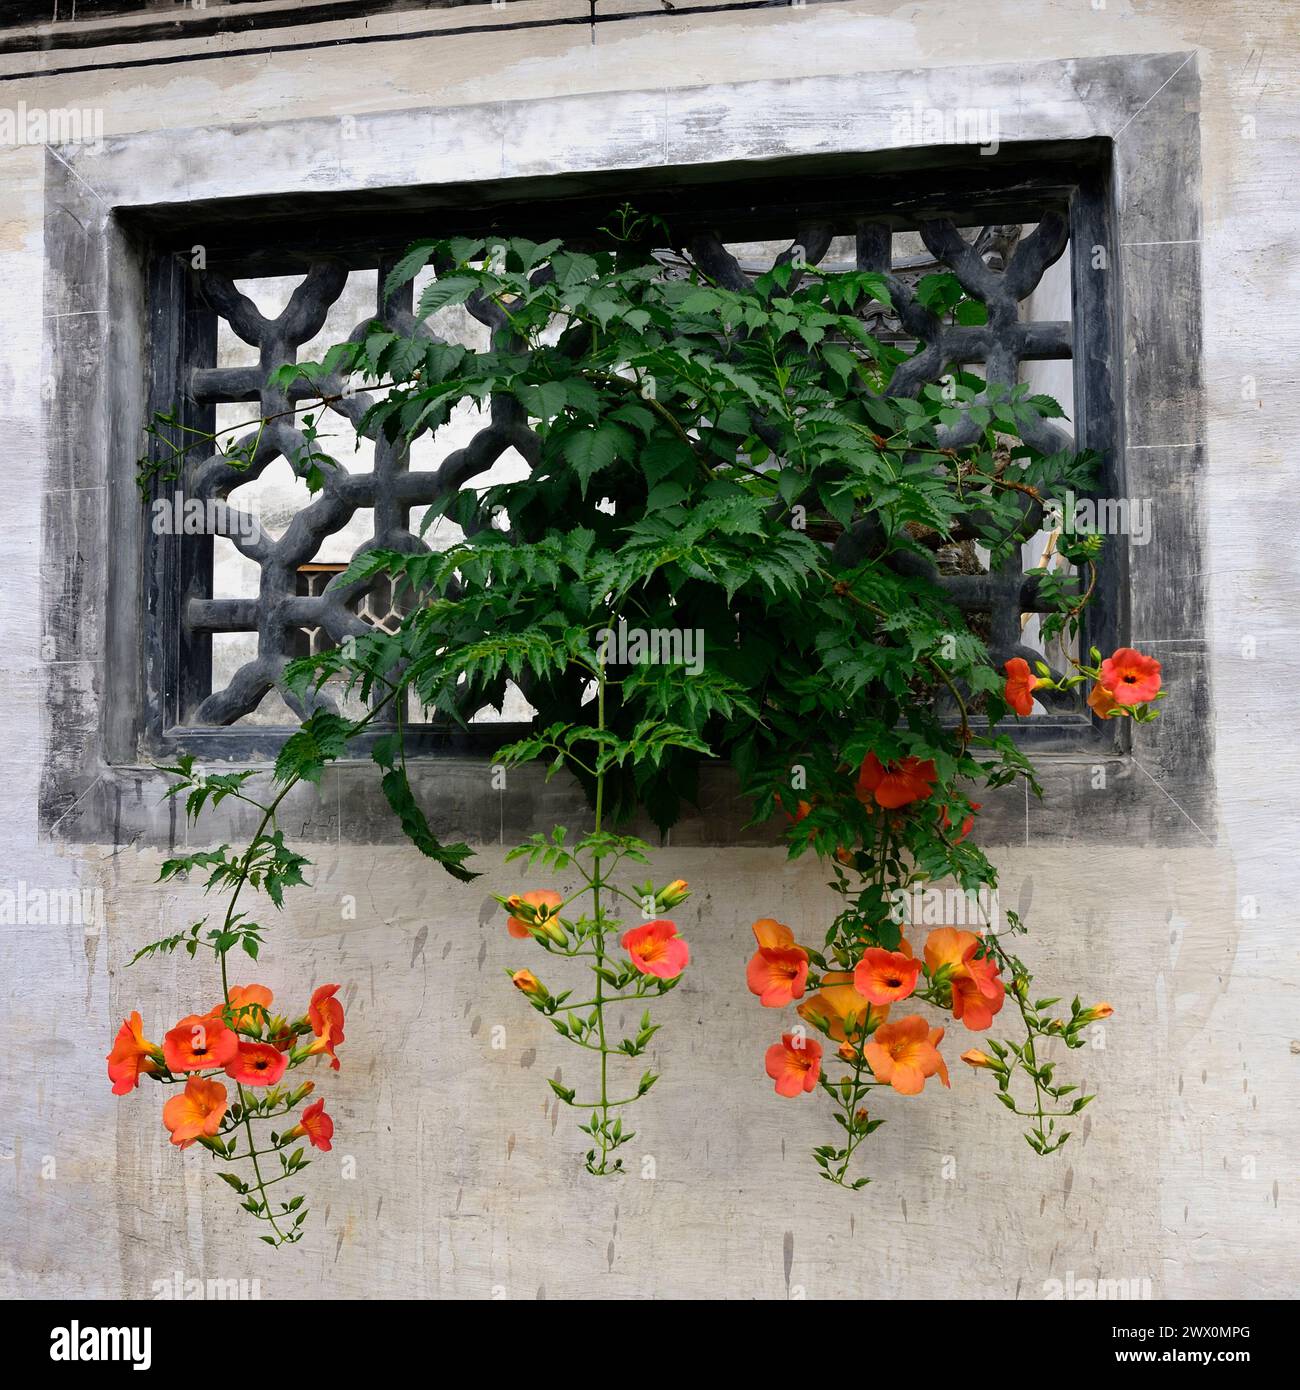 A decorative stone window in Xidi Ancient Town reflects its preservation of medieval Chinese architecture. Stock Photo